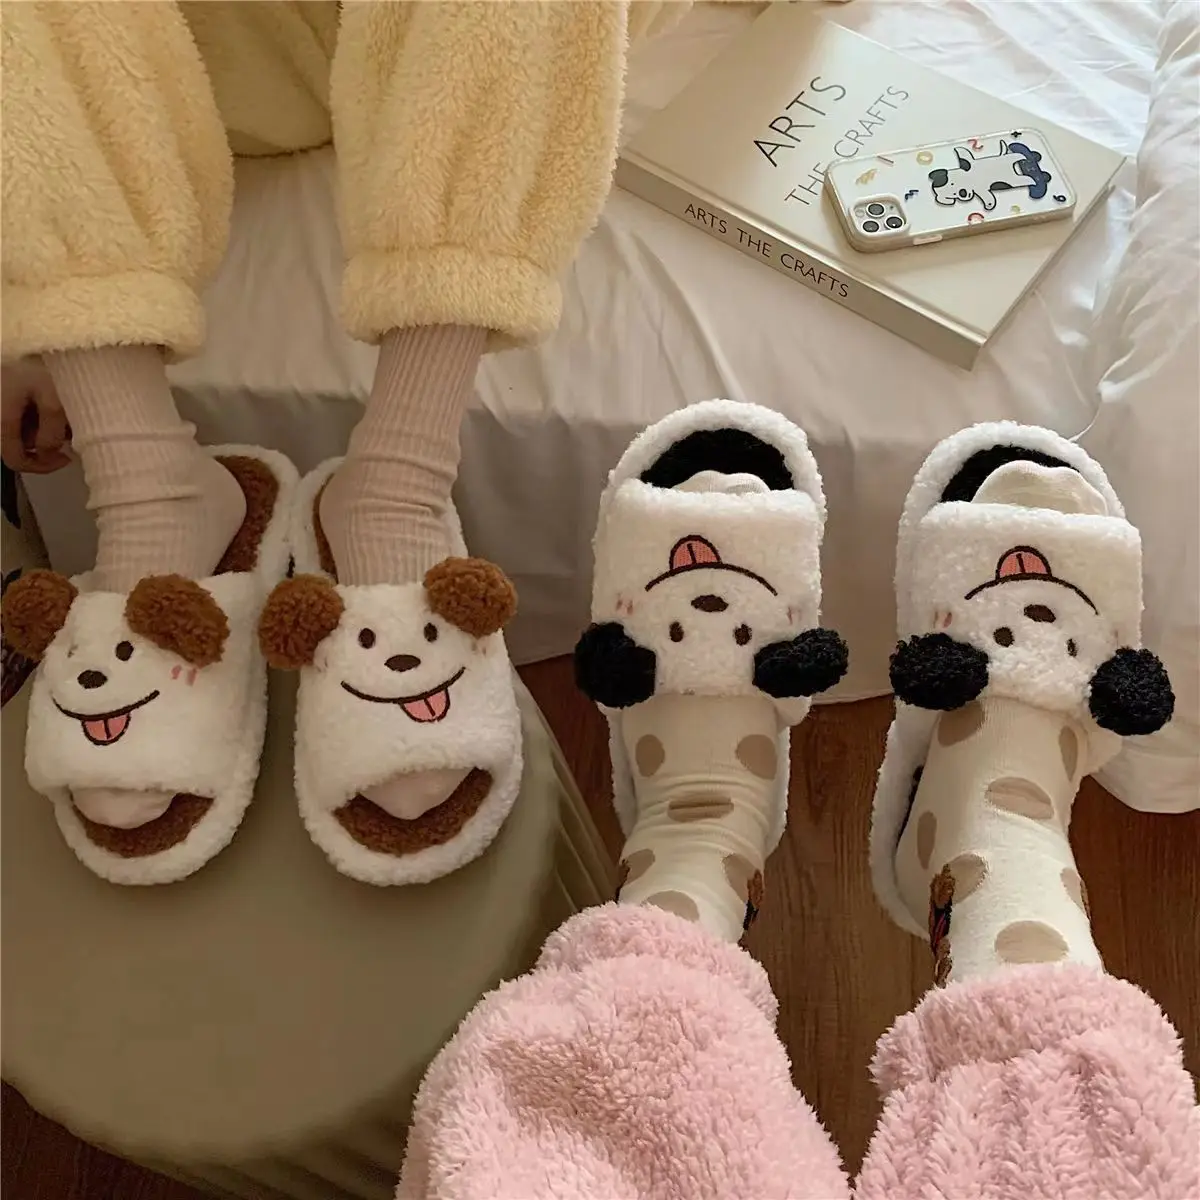 Fashionable Winter Indoor Slippers For Women And Men Warm Fluffy Foam And Plush Material Anti-slippery Flexible For Christmas